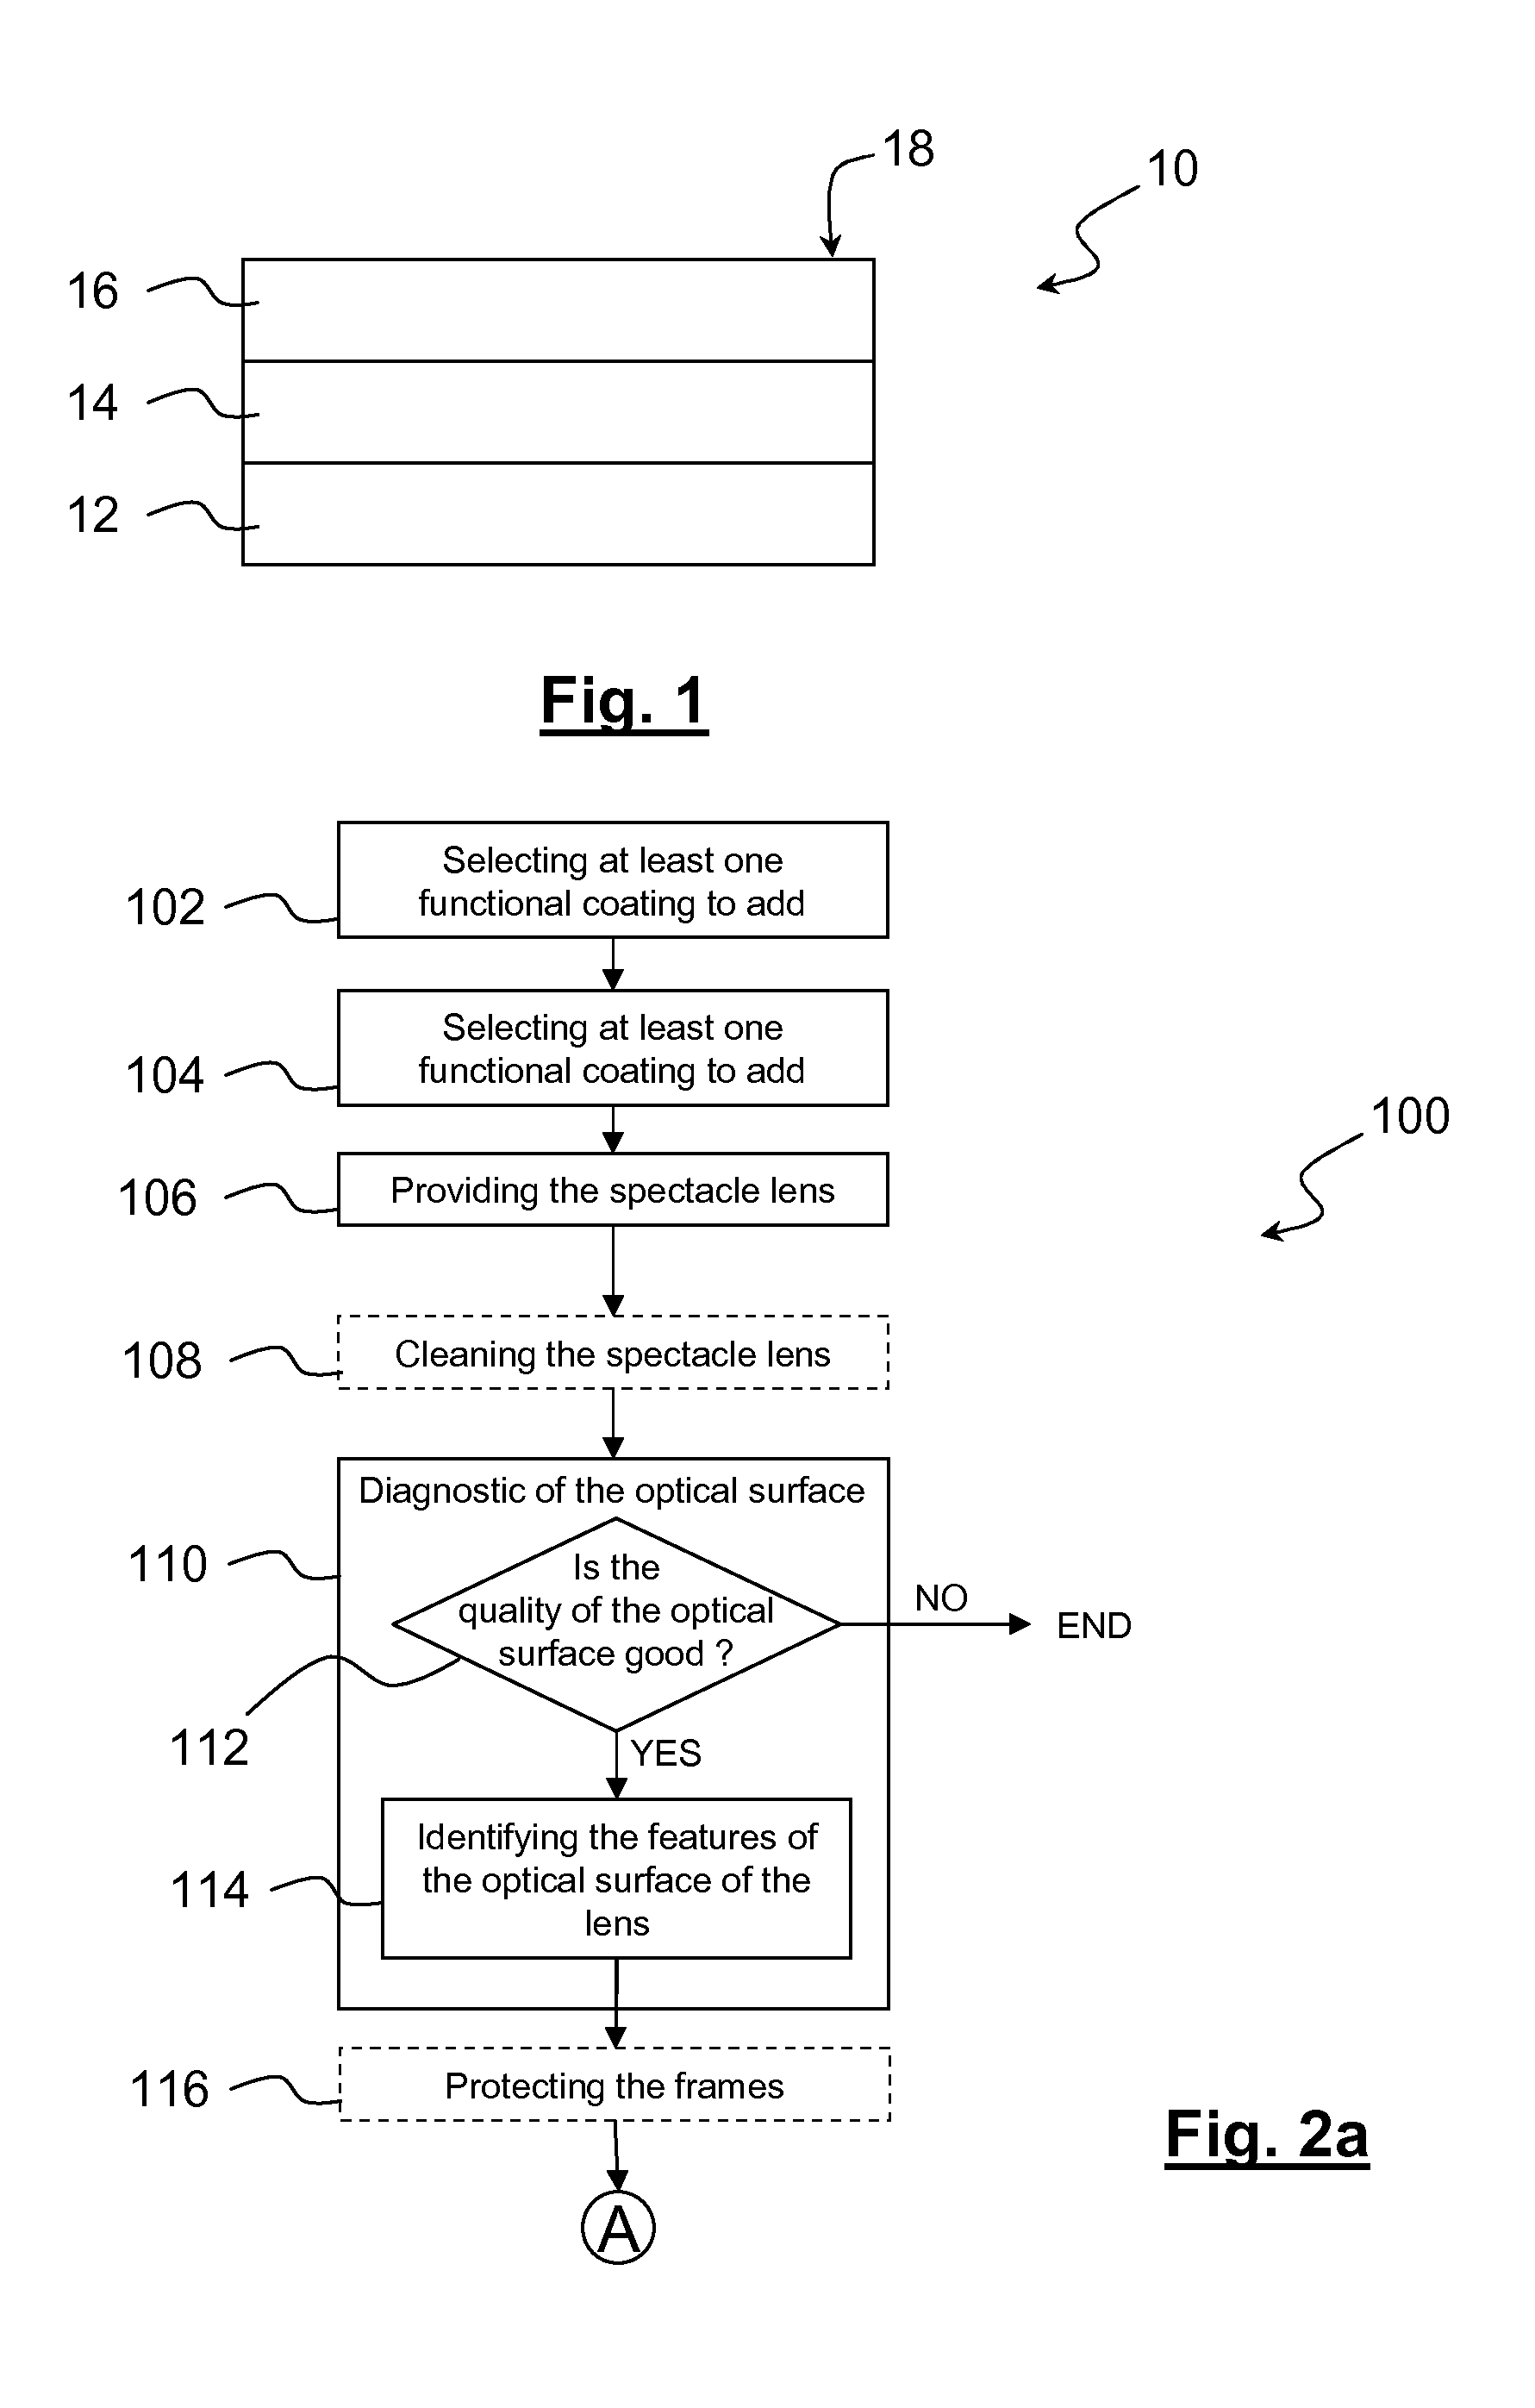 Method for the addition of a functional coating on an optical surface of a spectacle lens suitable to be arranged in a spectacle frame